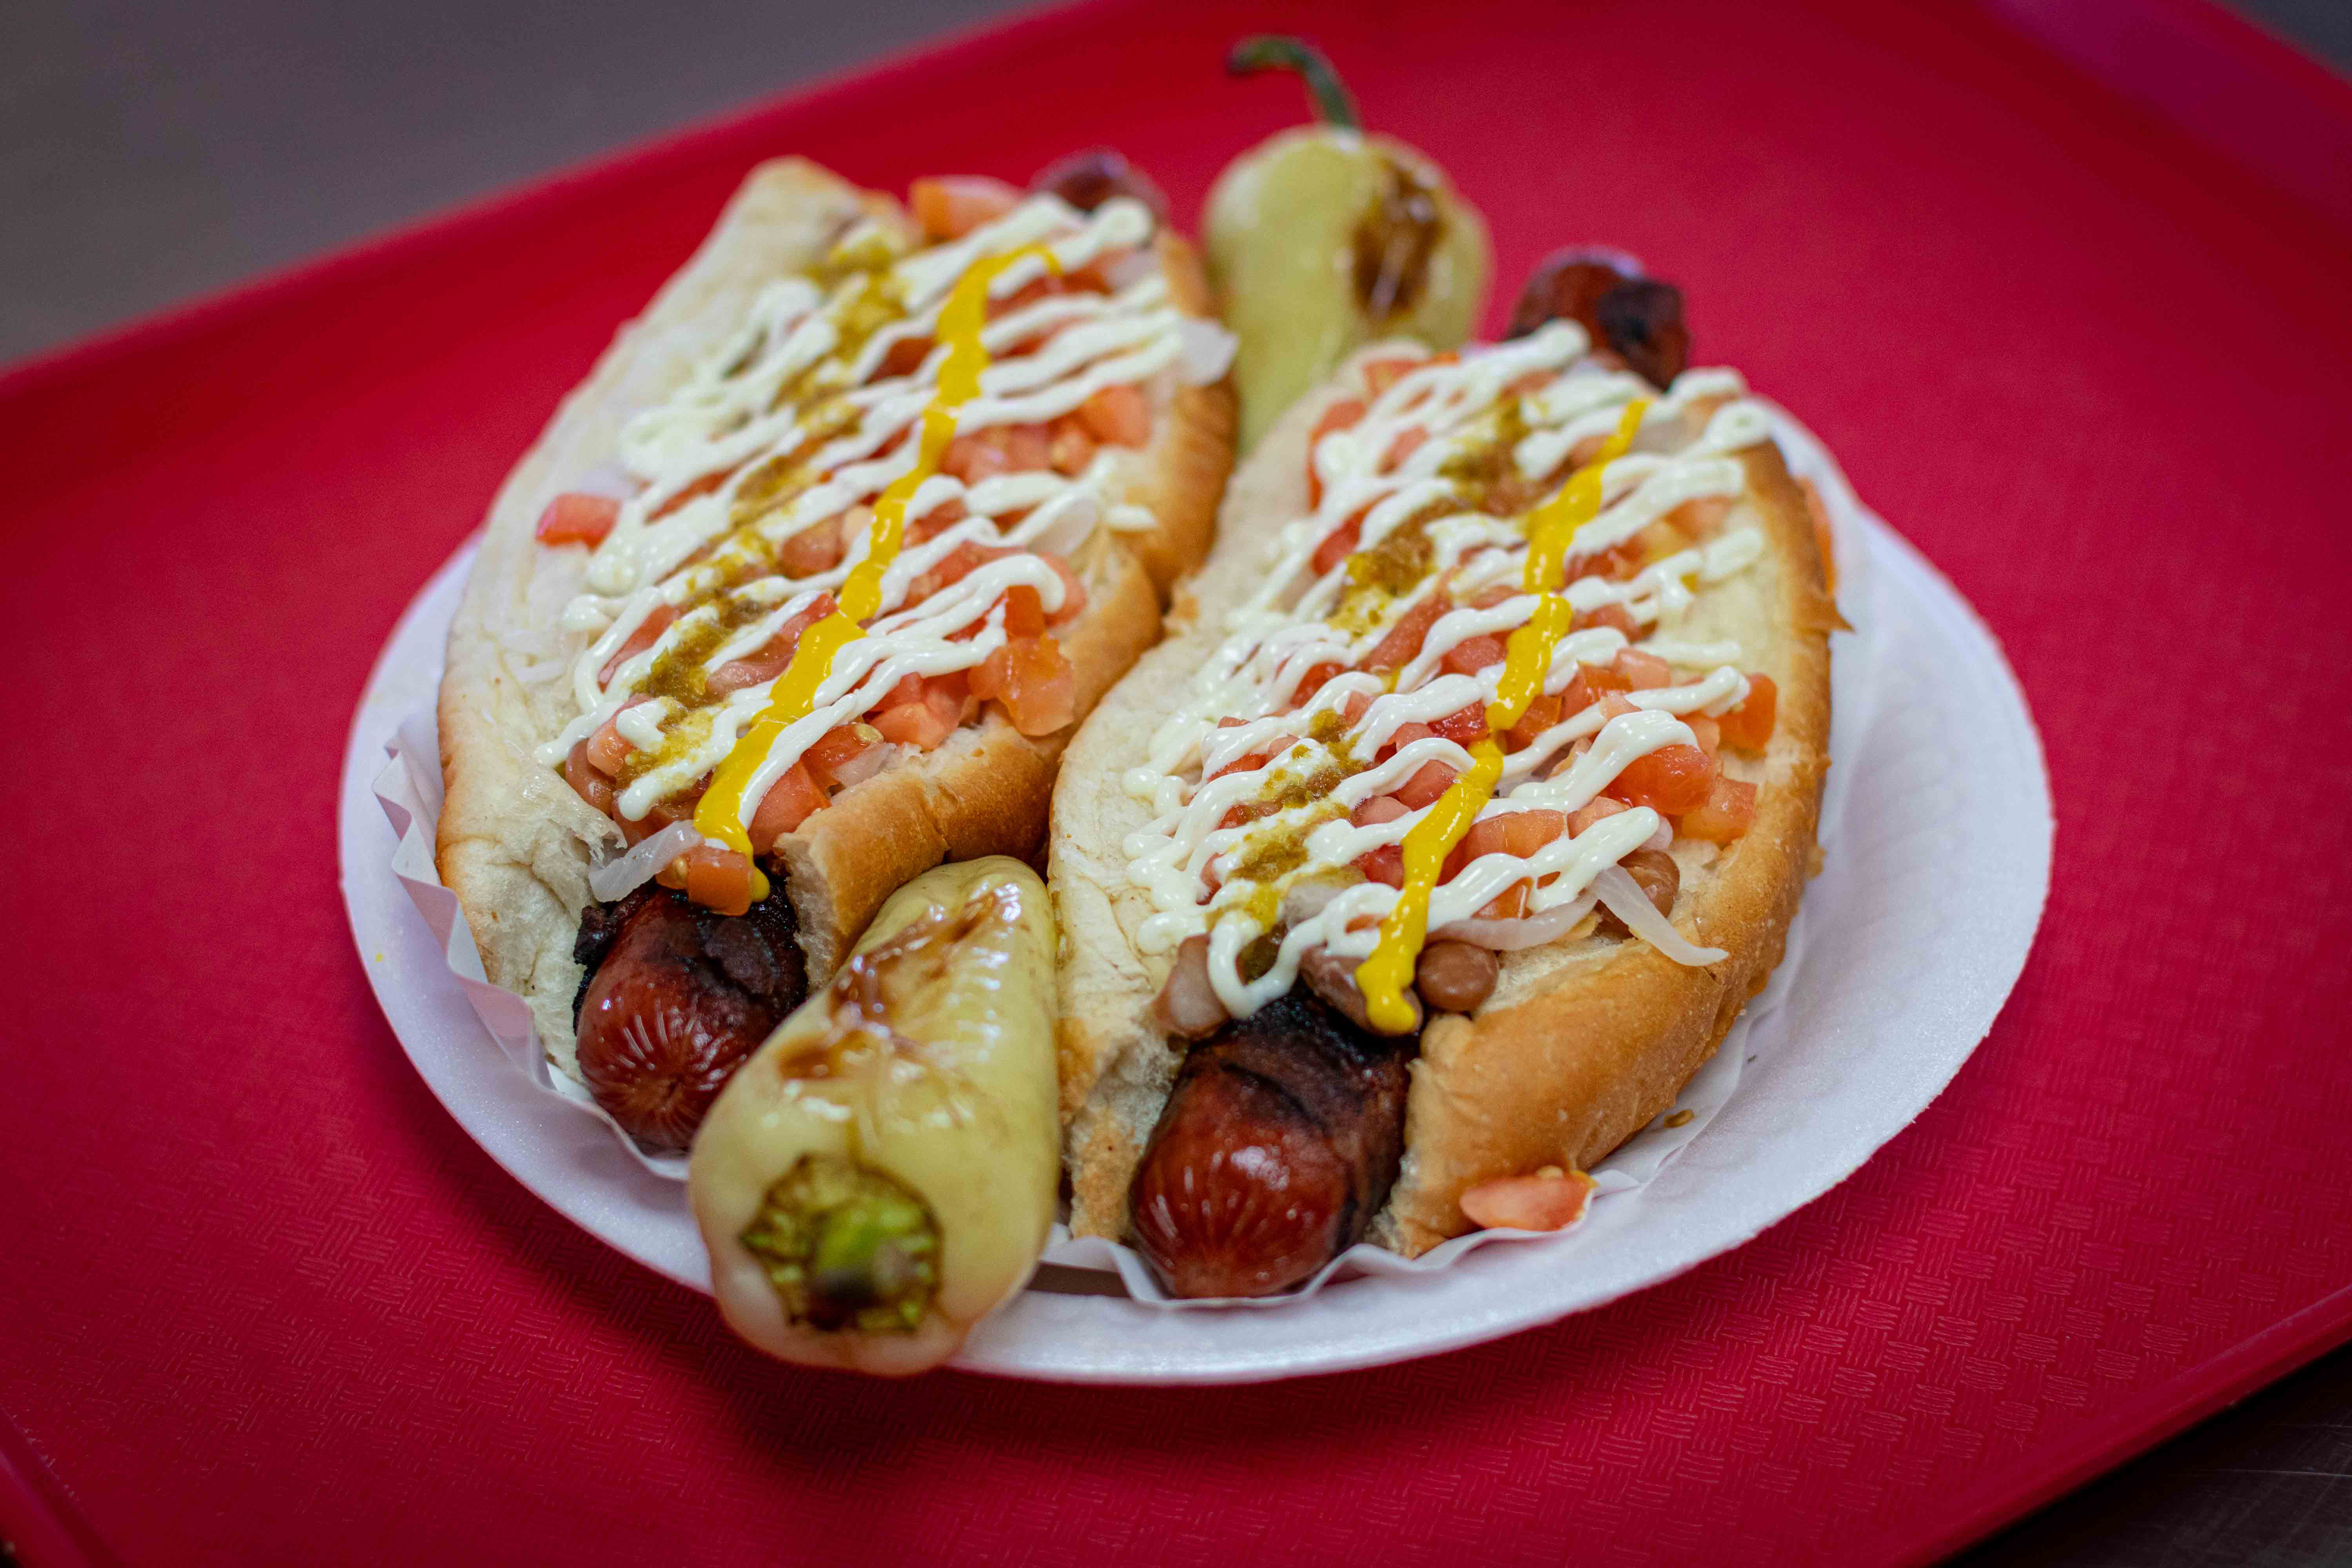 Best Hot Dogs at the Jersey Shore